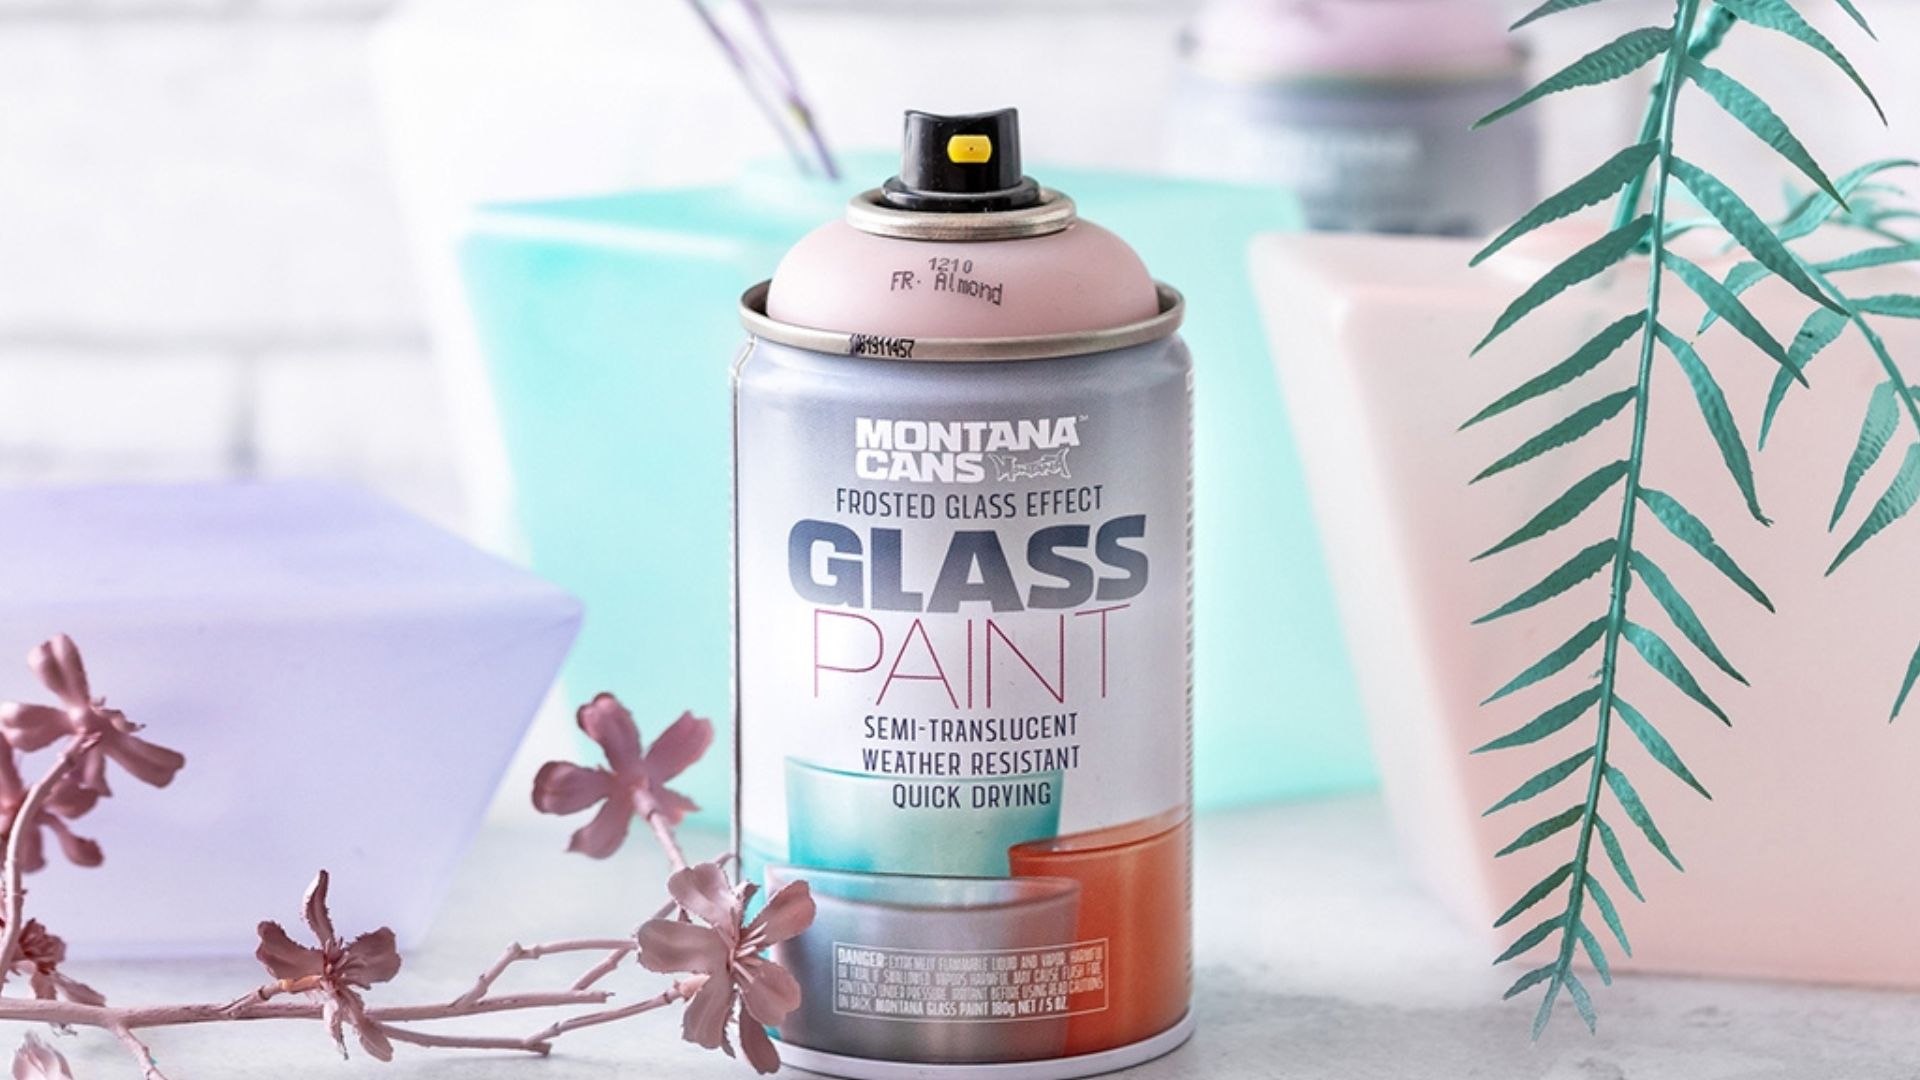 Montana Frosted Glass Effect Semi-Translucent Paint